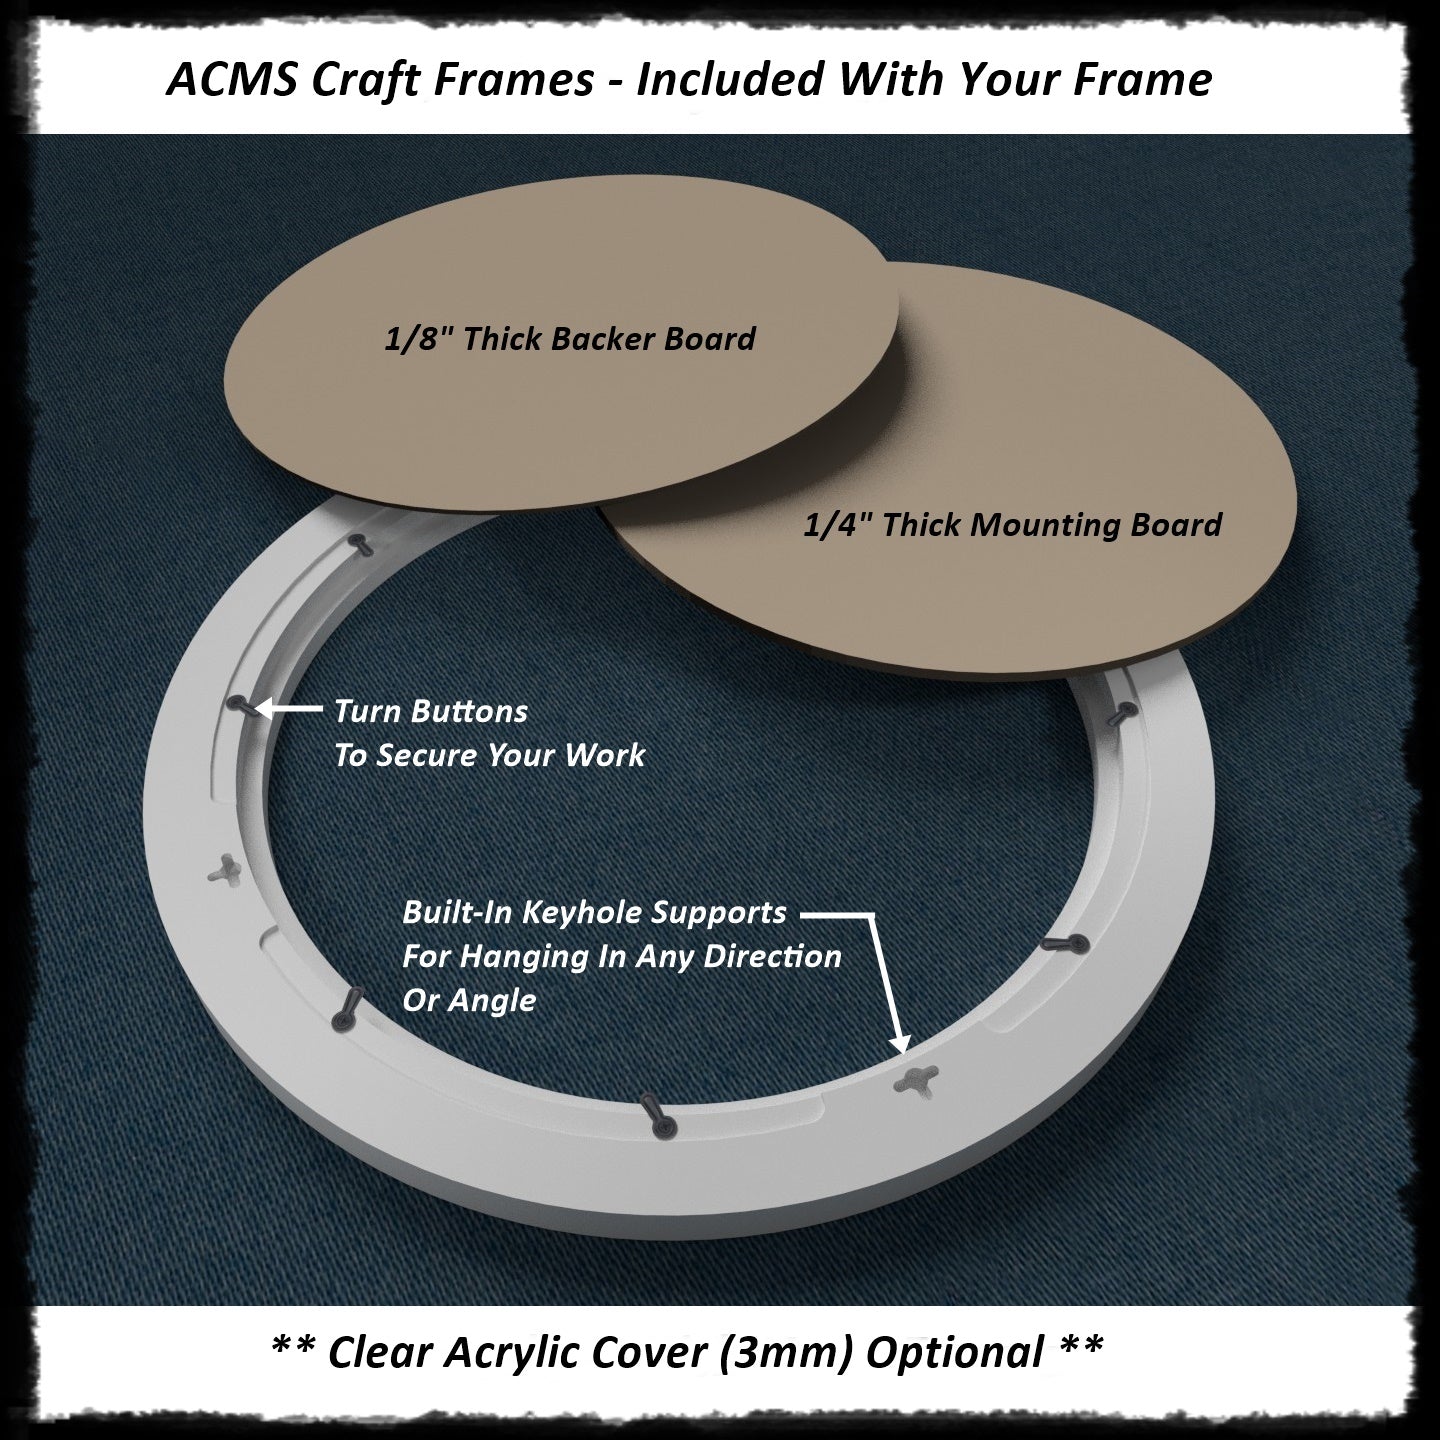 Round Craft Frame - FLAT Profile - 1 1/4" Frame Width - 1" Thick